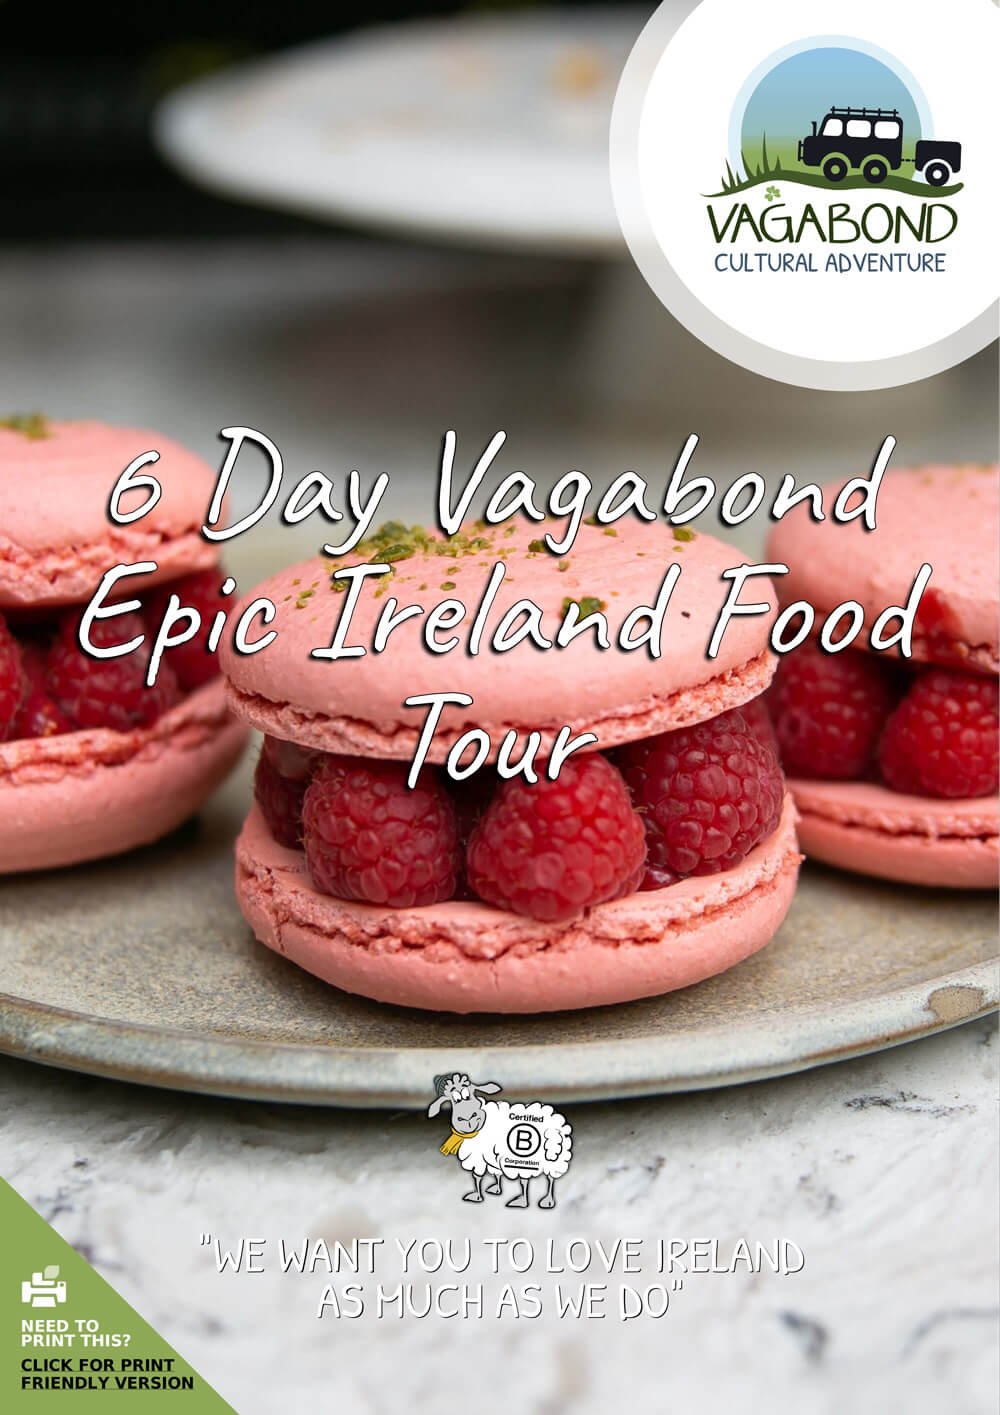 6 Day Vagabond Epic Ireland Food Tour itinerary cover showing raspberry macaroons